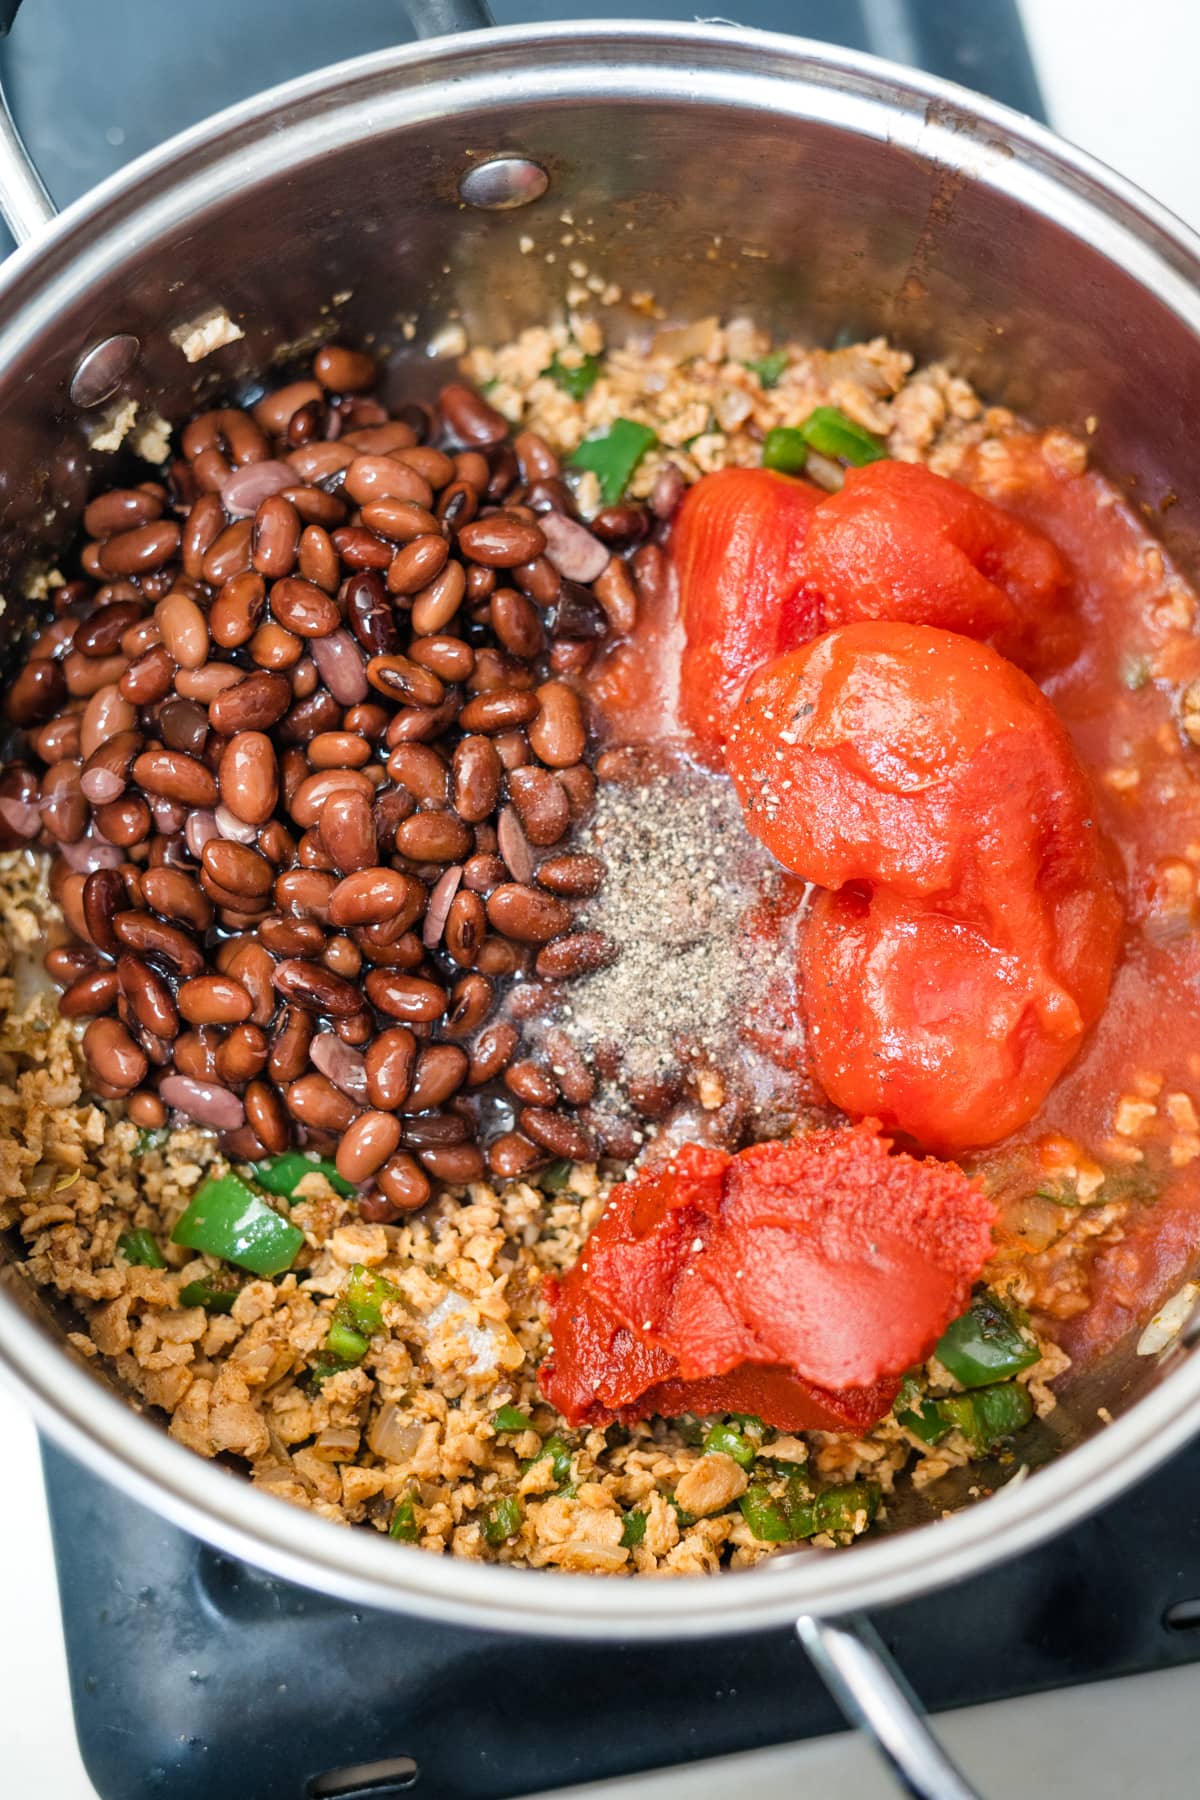 A TVP chili with beans, tomatoes and other ingredients.